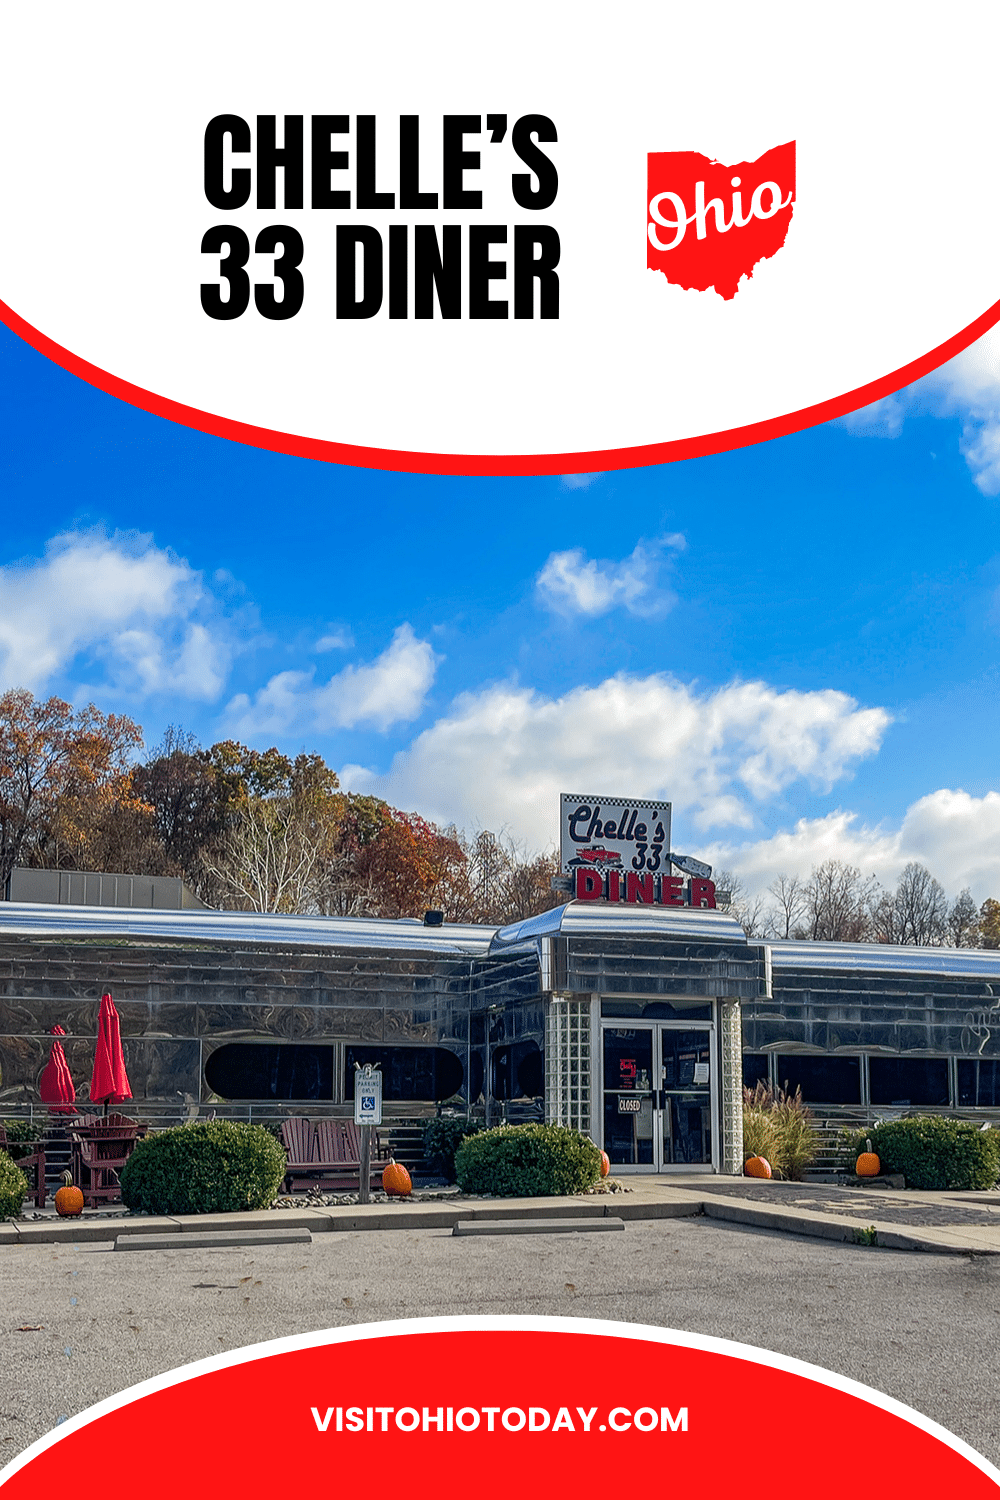 Chelles 33 Diner is a 50s-style diner with a varied menu and great service, located in the Rockbridge area of Hocking Hills.